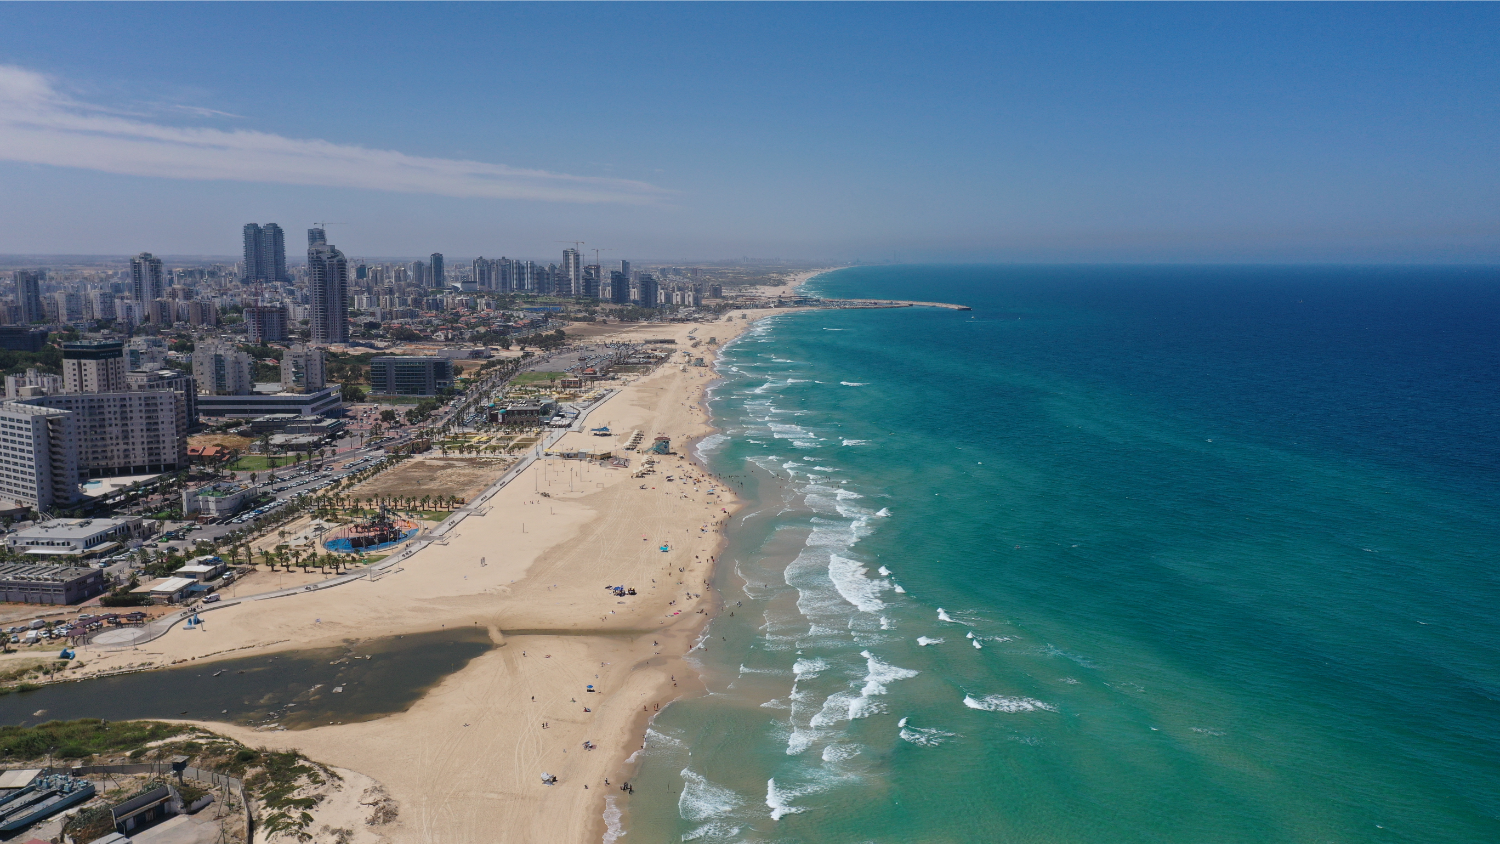 Jerusalem (Ashdod) is a port city on the Mediterranean Sea and the second destination on this Eastern Mediterranean Voyage